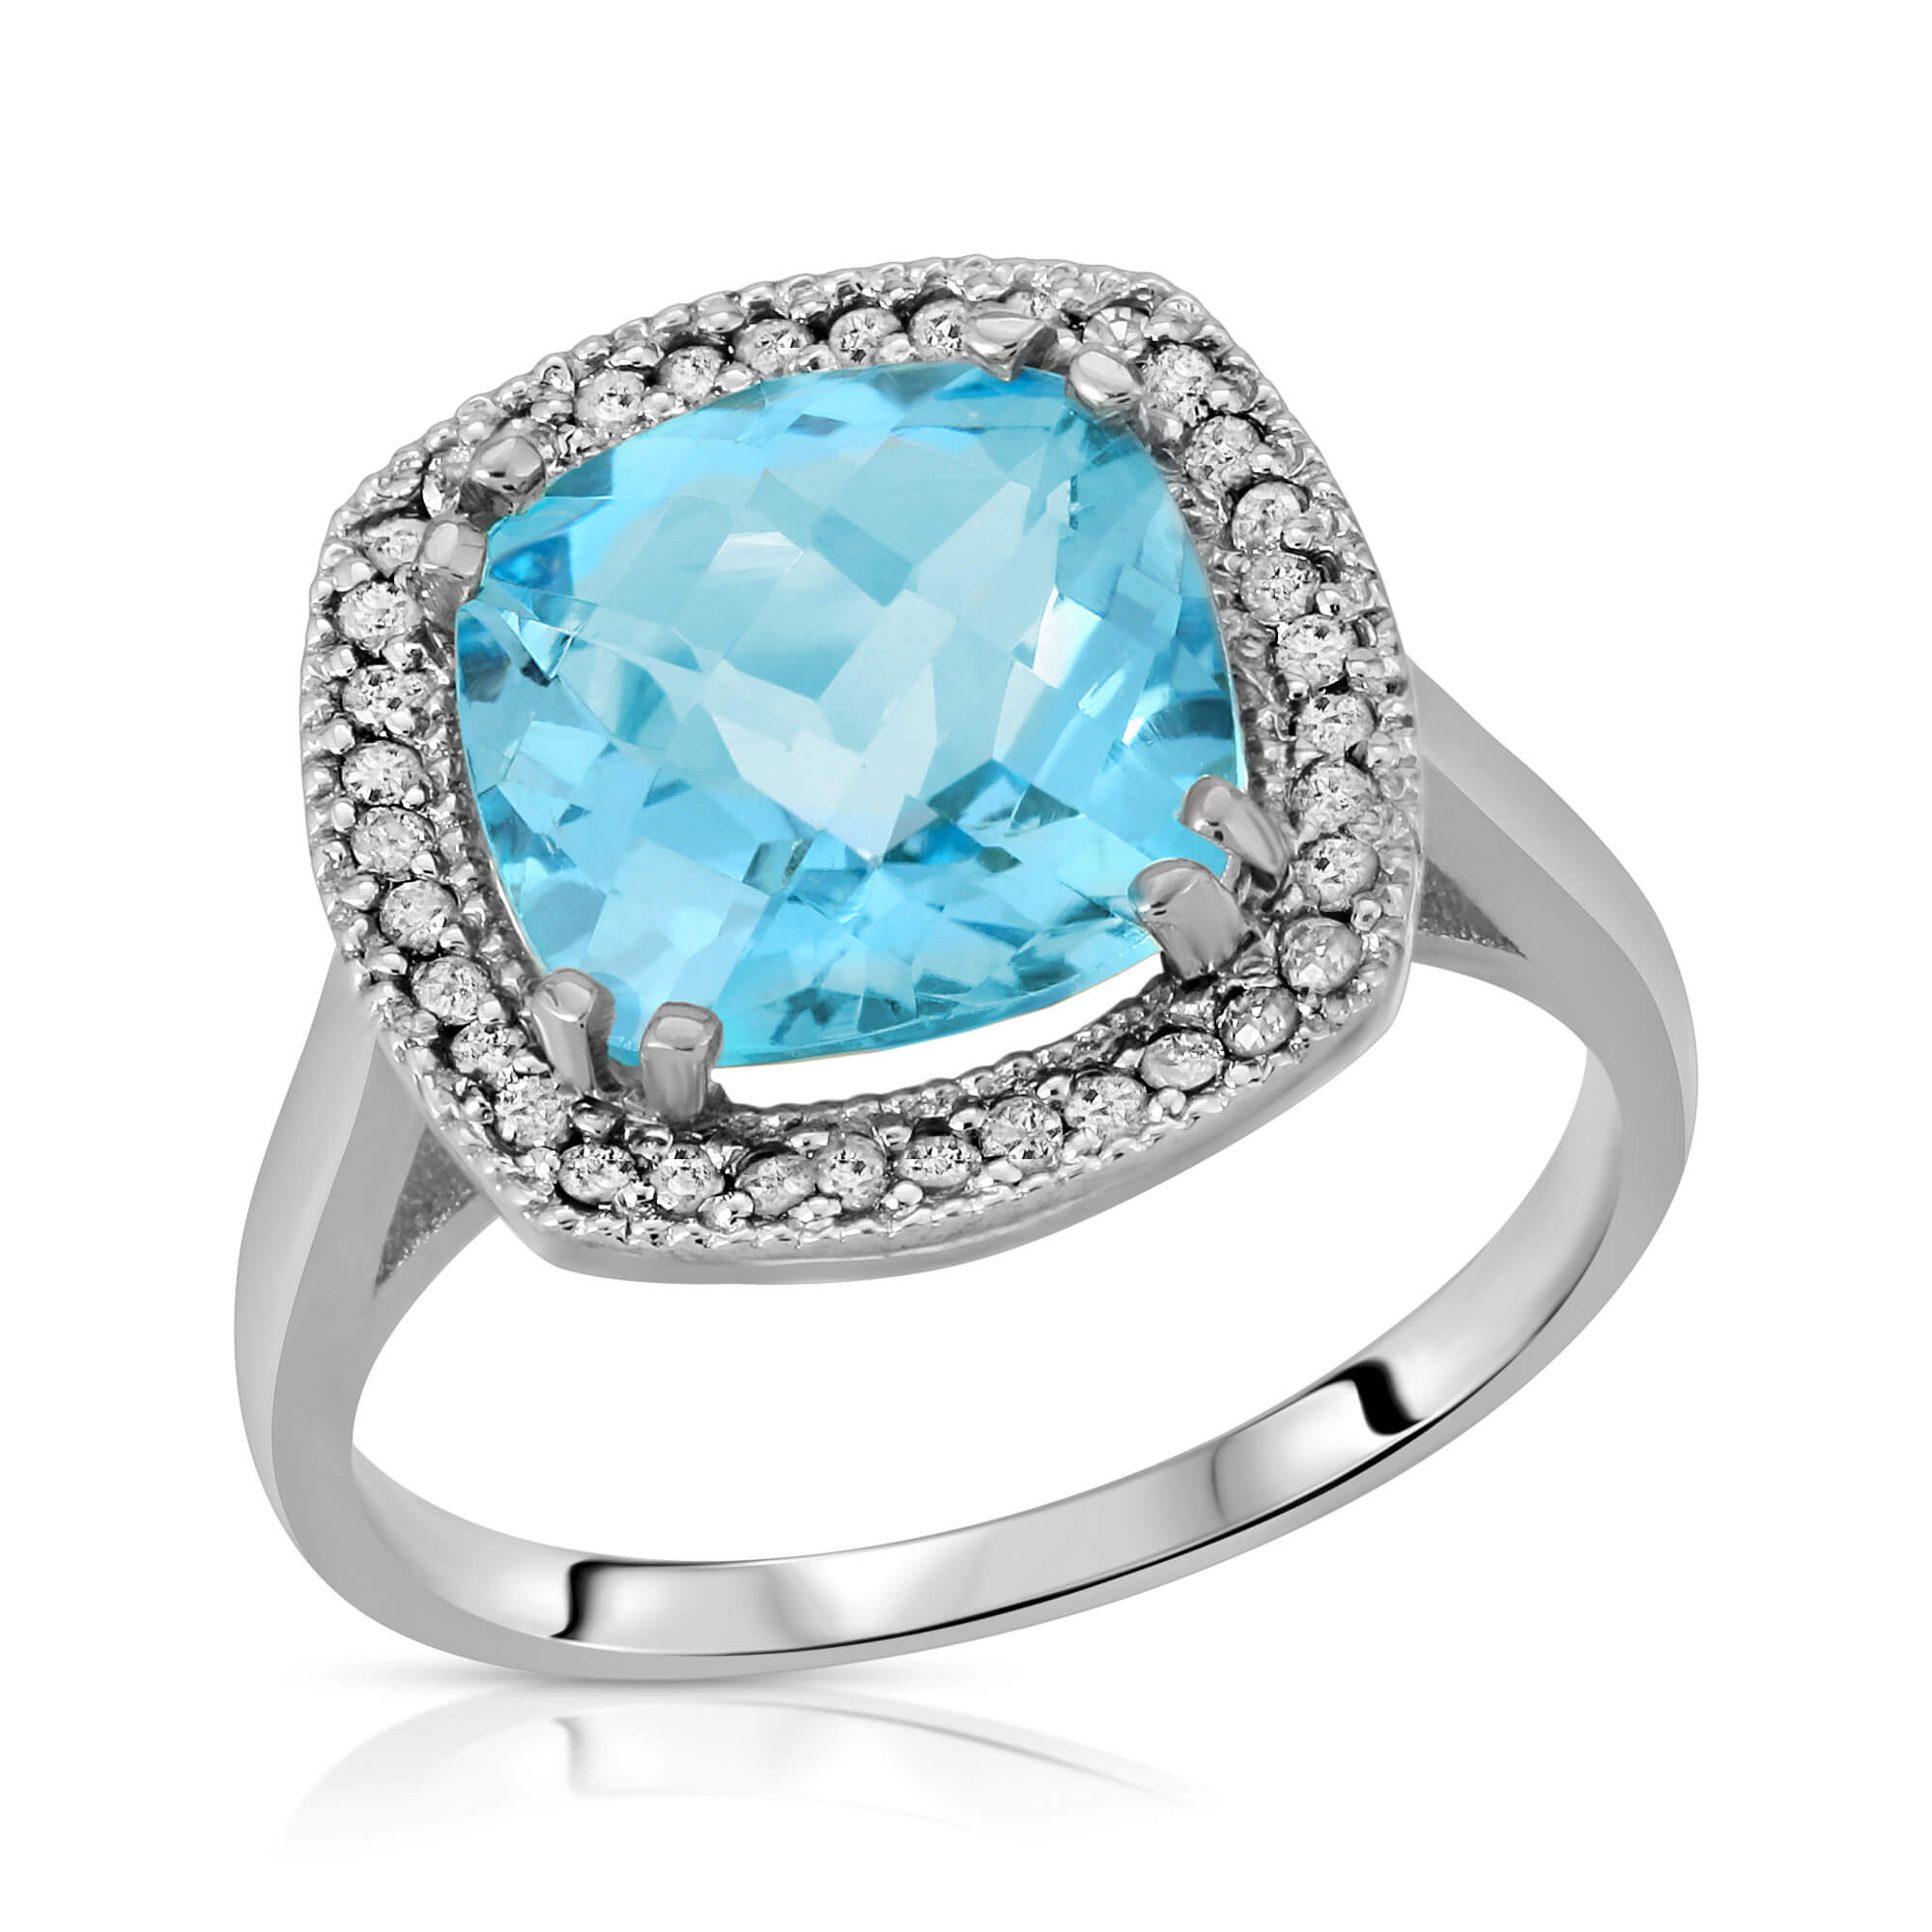 Cushion Cut Blue Topaz Ring 5.2 ctw in Sterling Silver